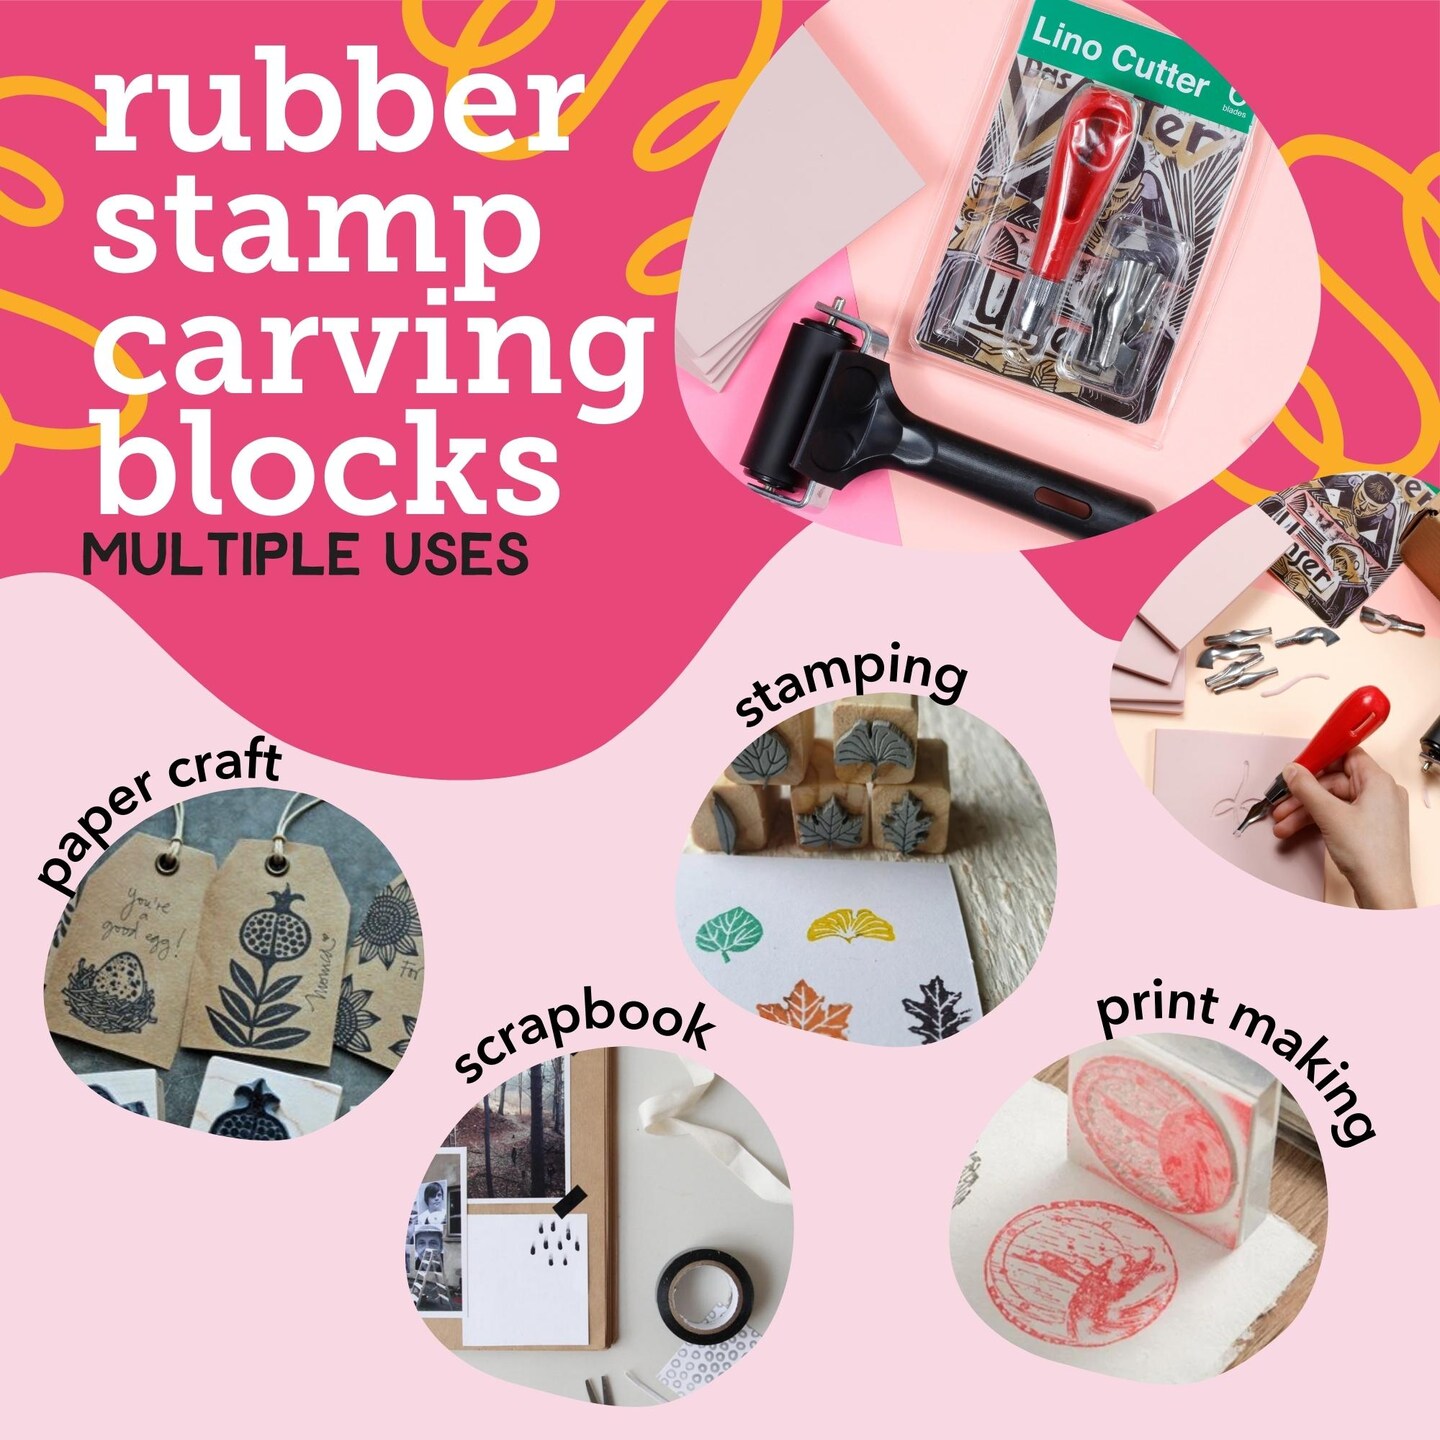 Rubber Stamp Making Kit with Stamp Blocks and Tools - Printmaking